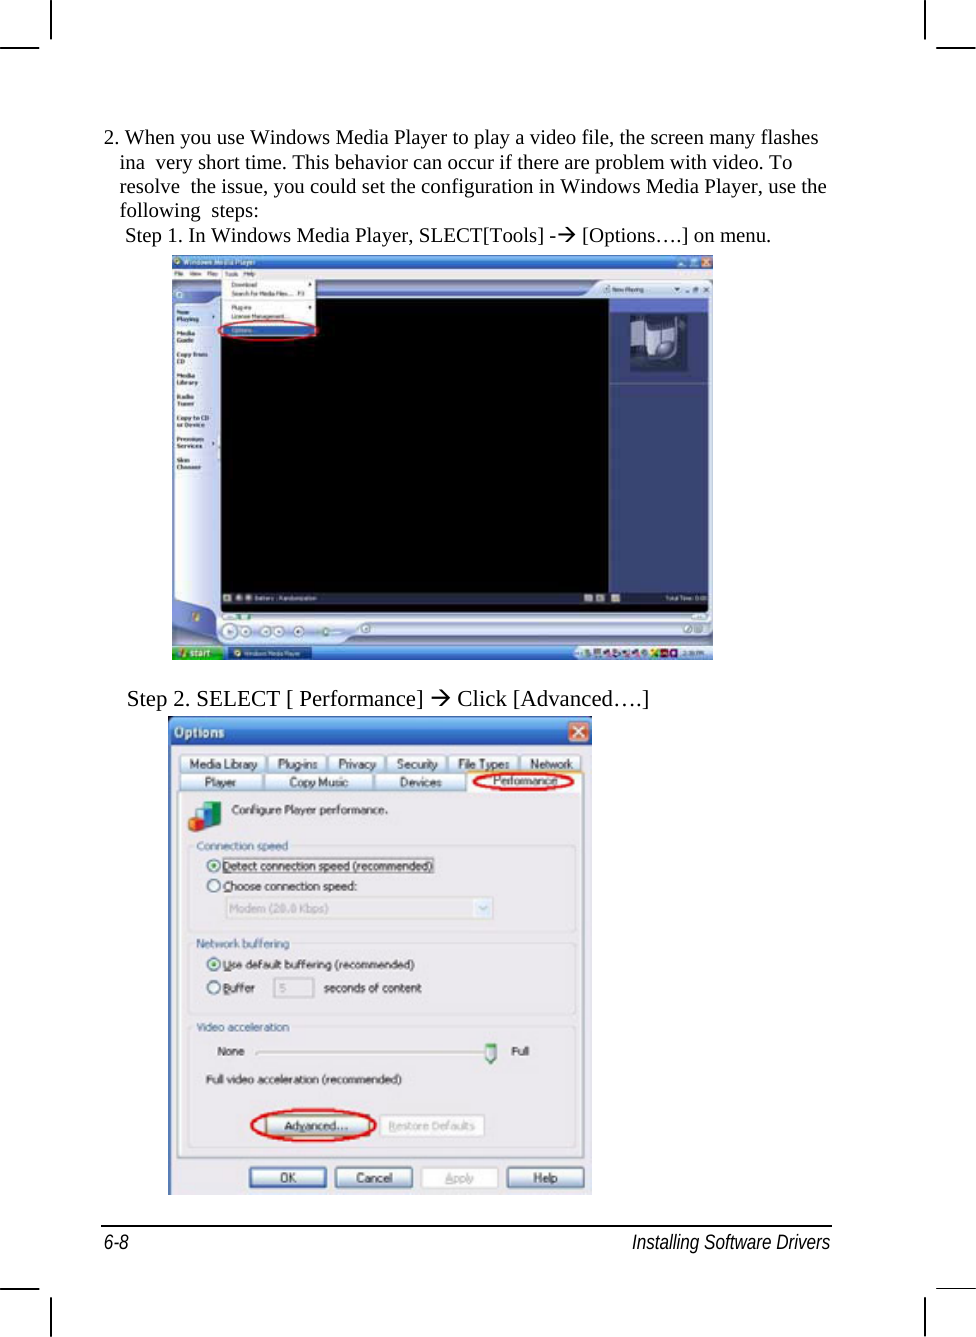  2. When you use Windows Media Player to play a video file, the screen many flashes ina  very short time. This behavior can occur if there are problem with video. To resolve  the issue, you could set the configuration in Windows Media Player, use the following  steps:     Step 1. In Windows Media Player, SLECT[Tools] -Æ [Options….] on menu.                   Step 2. SELECT [ Performance] Æ Click [Advanced….]   6-8  Installing Software Drivers 